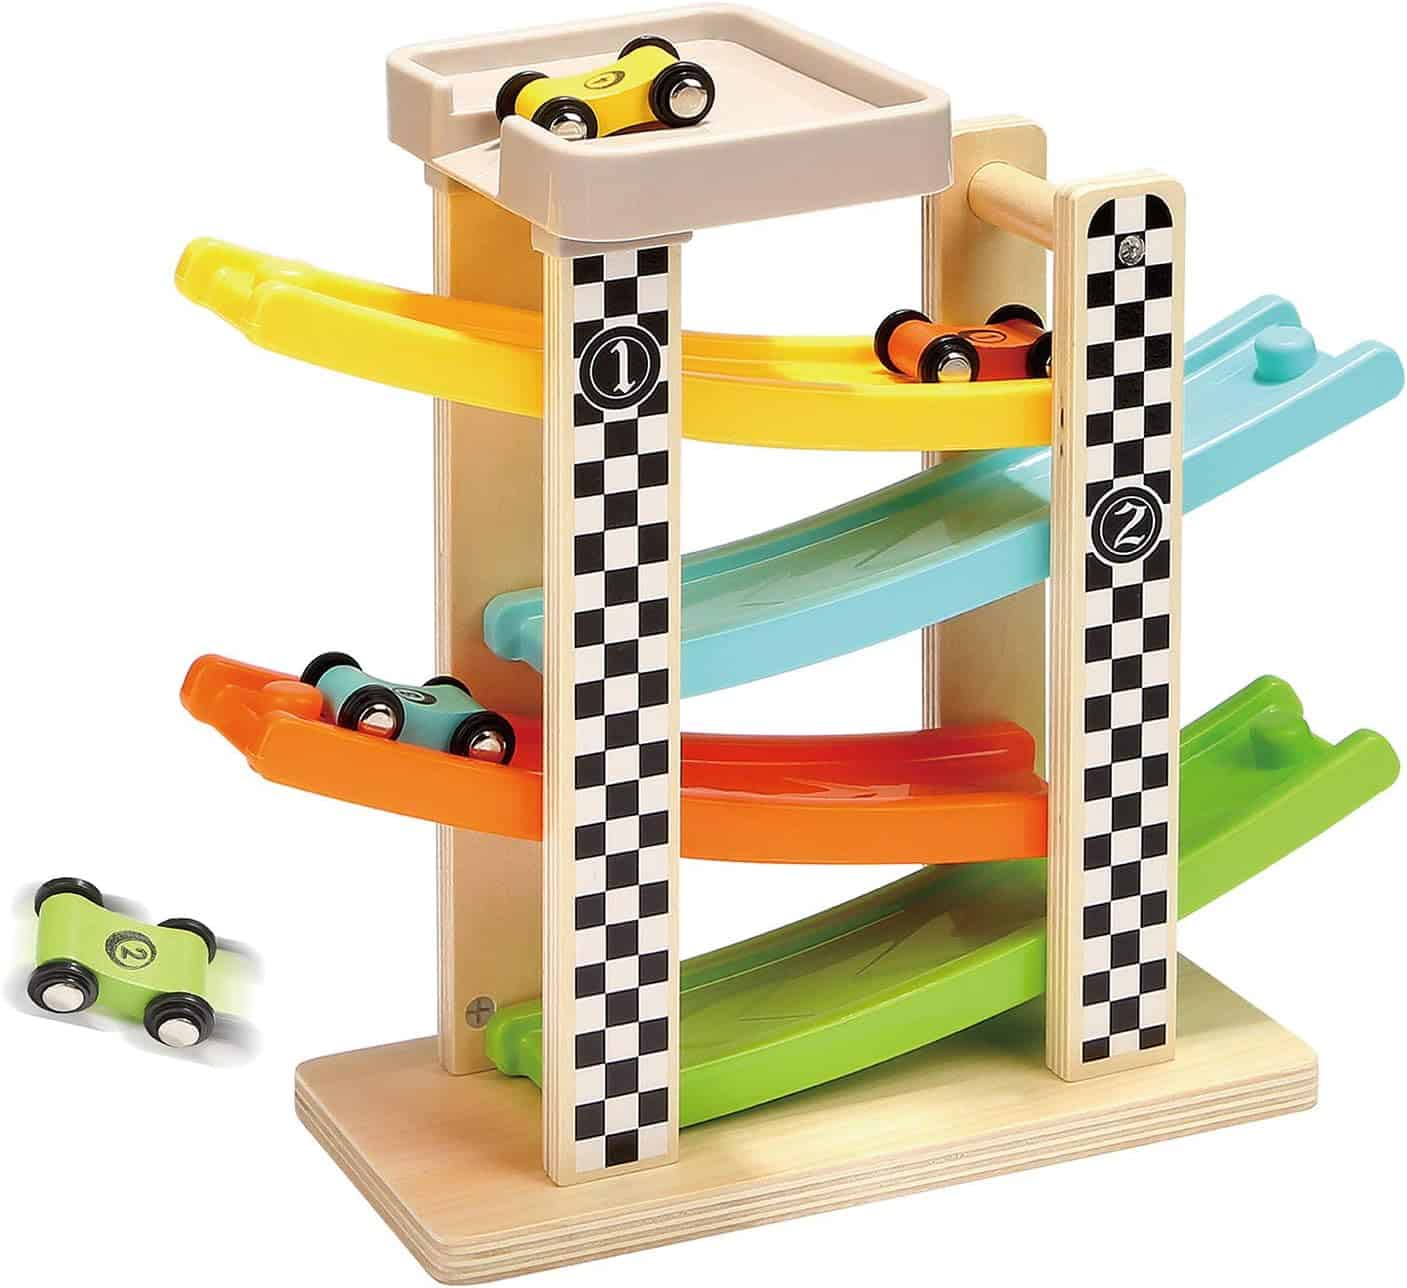 Toddler Toys for 1-2-Year-Old Boy